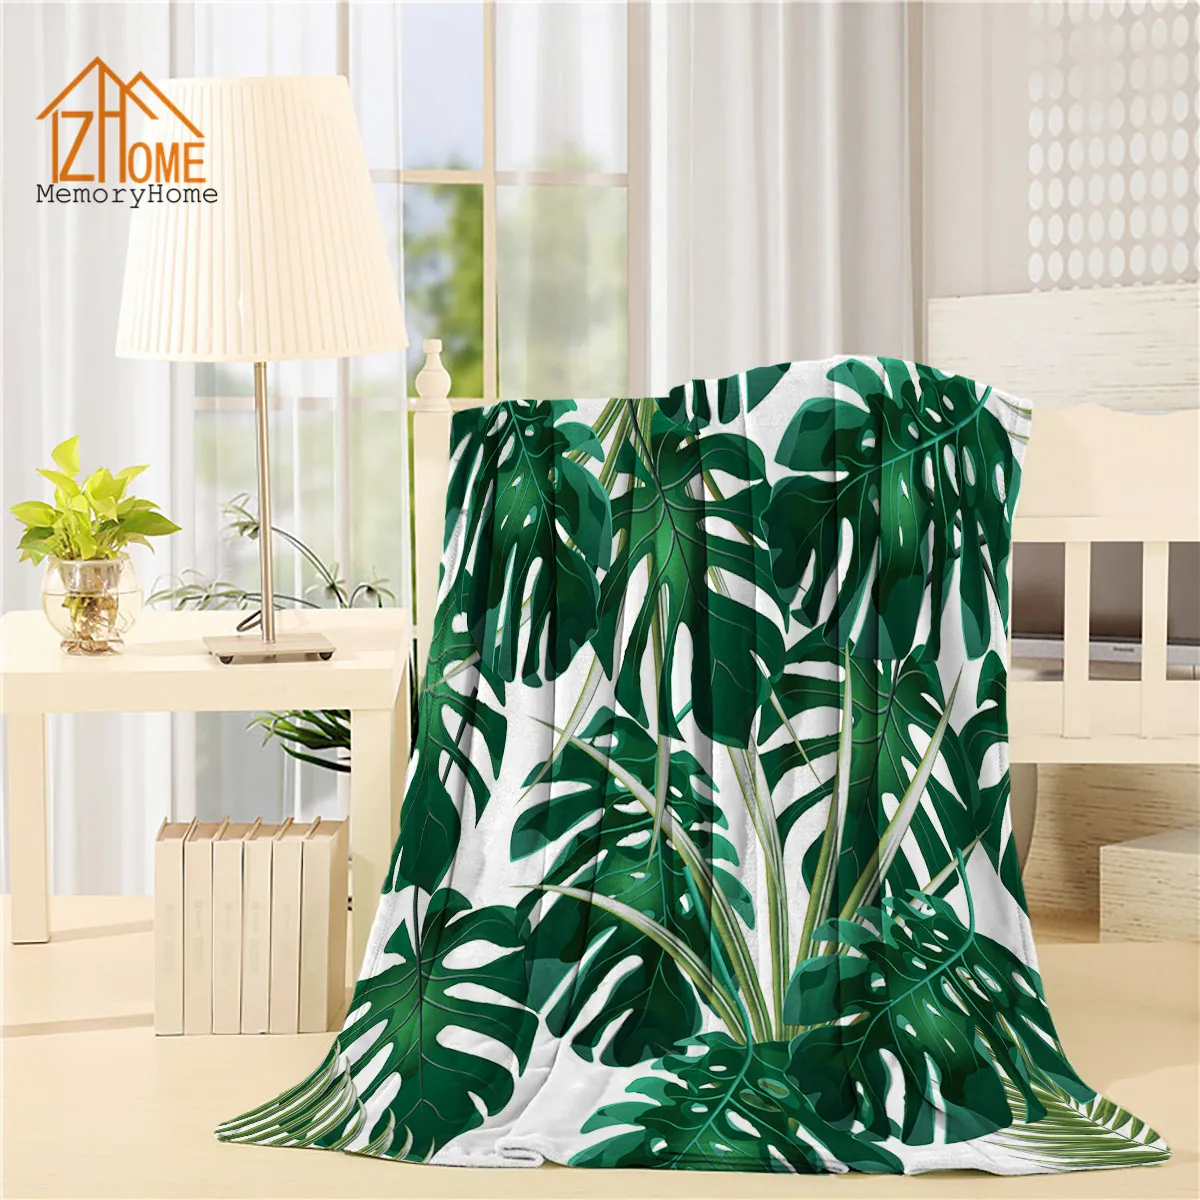 Cozy Plush for Indoor and Outdoor Use Tropical Leaves with Bird of Paradise Flower Hunter Green Fern Green 50 x 60 Ambesonne Philodendron Soft Flannel Fleece Throw Blanket 